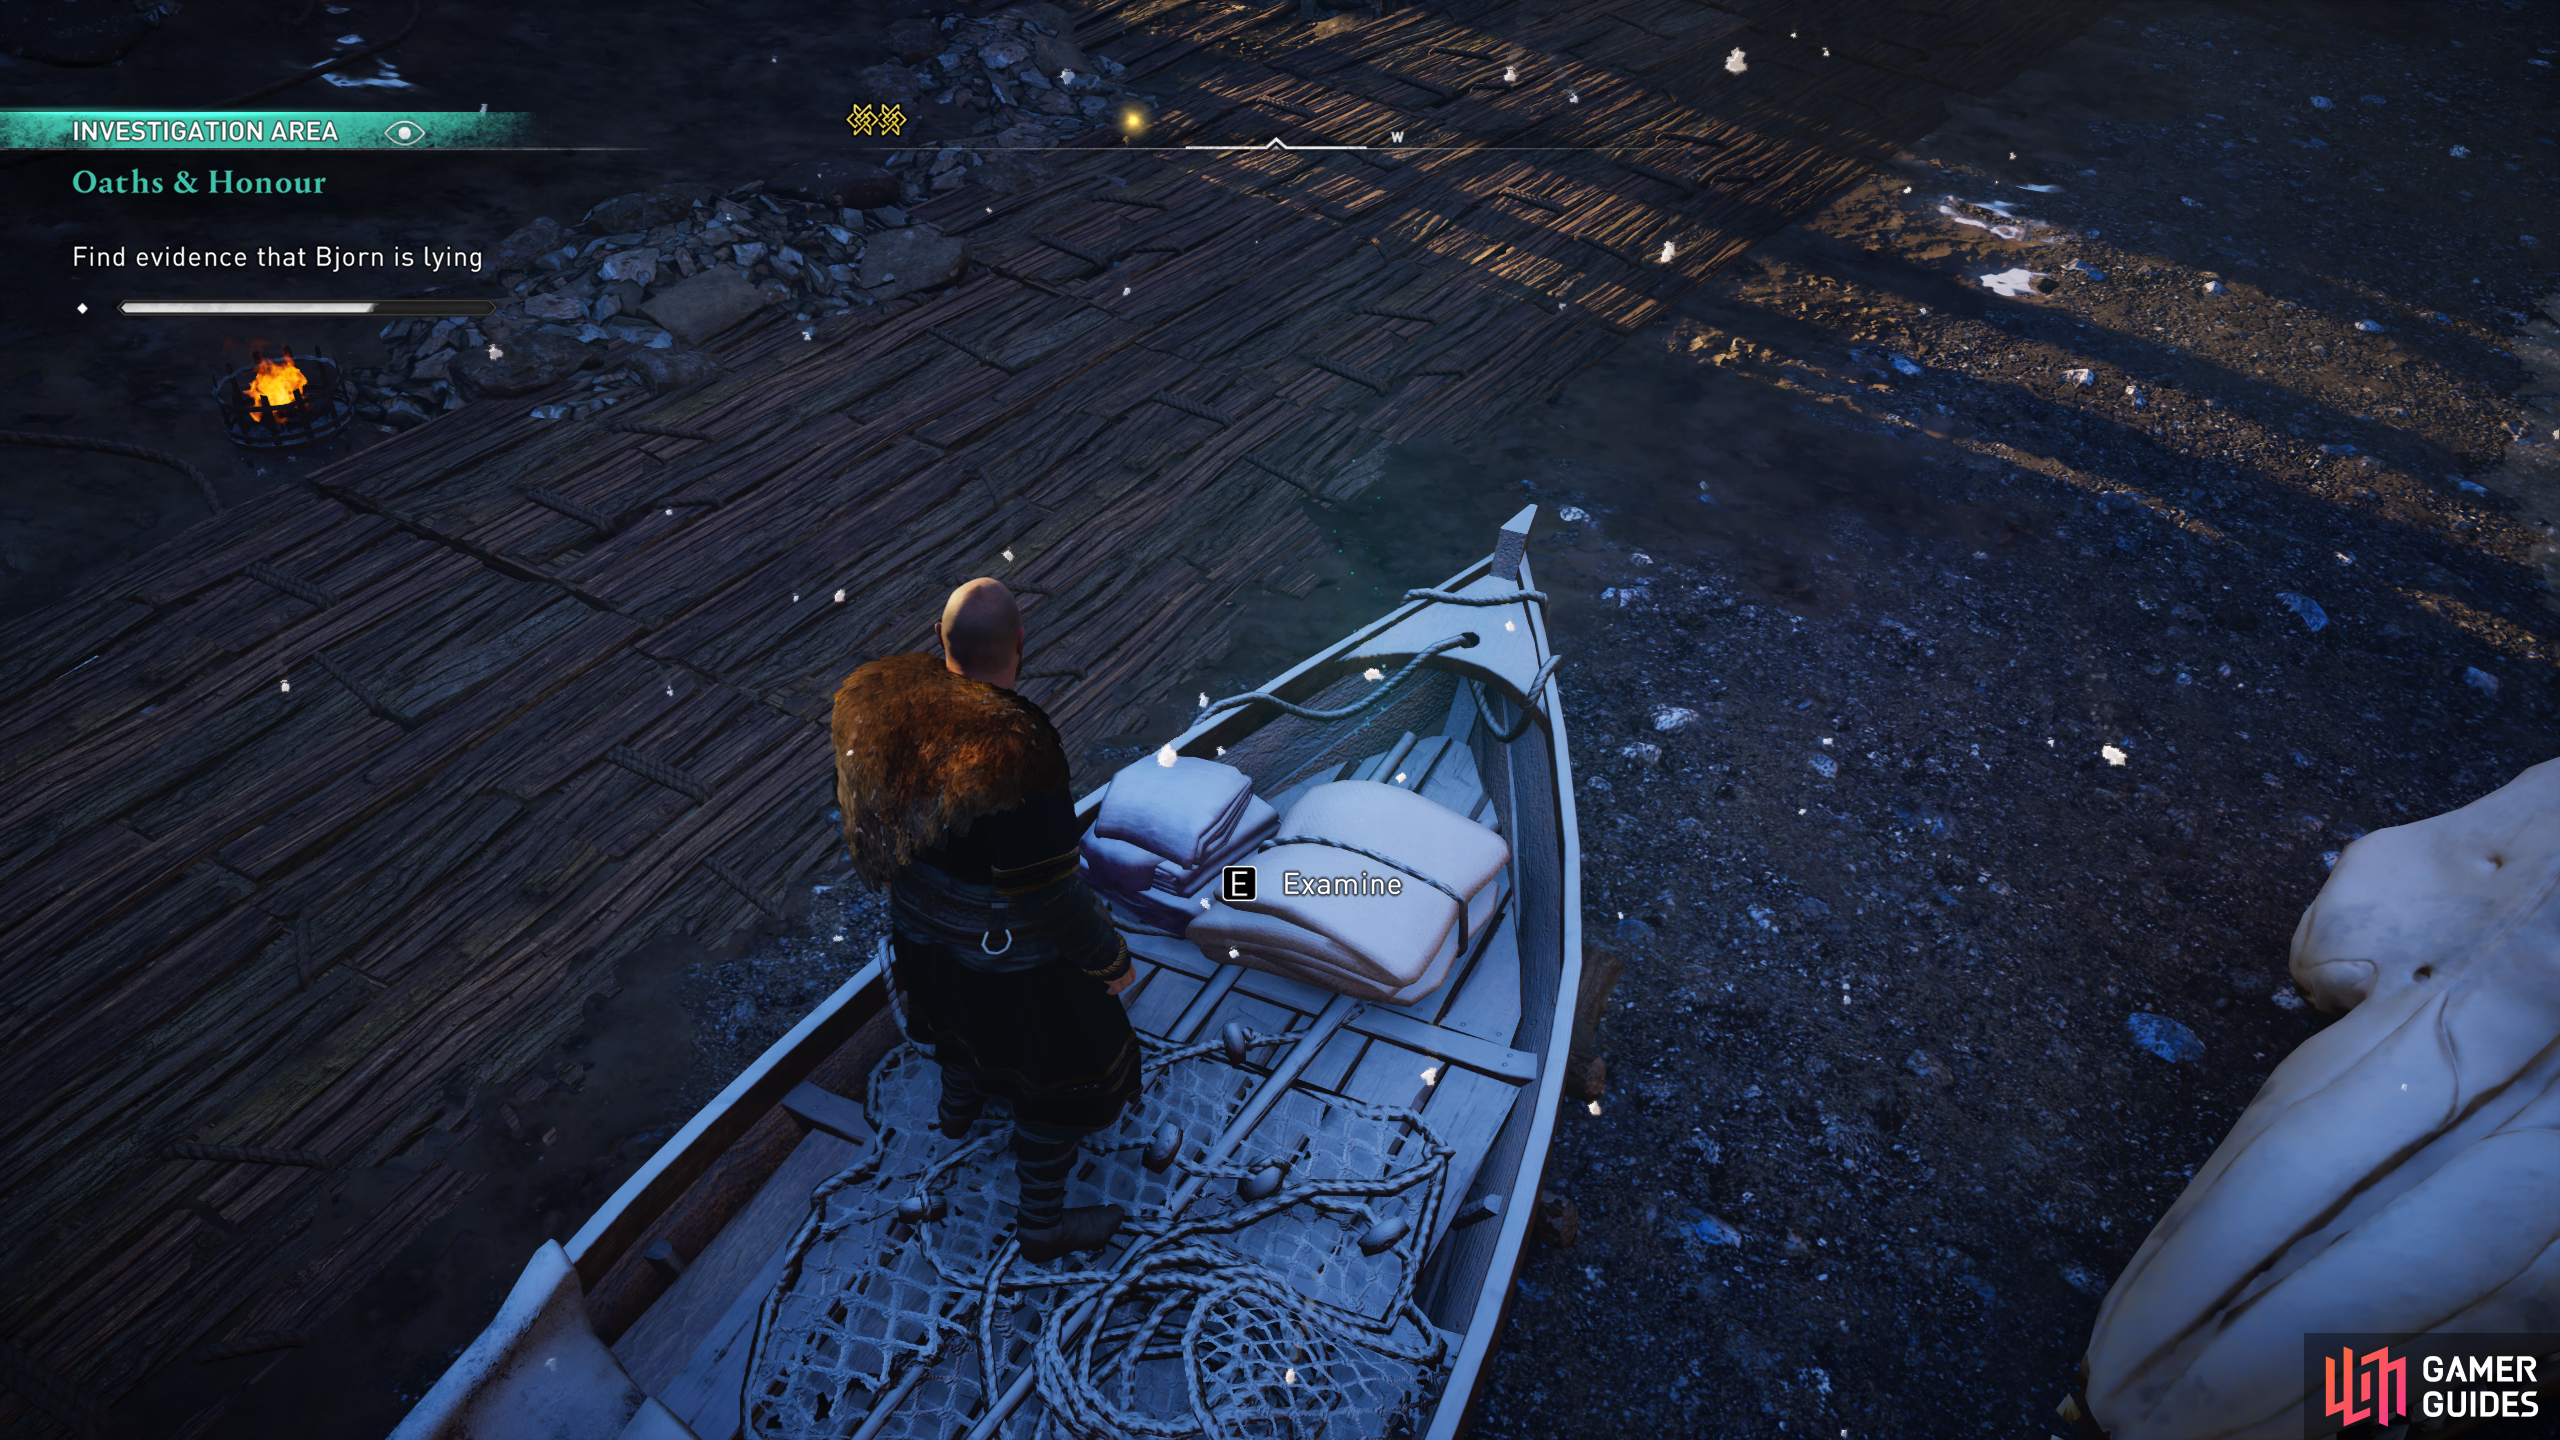 Youll need to examine Gunnhildas sail in Bjorns boat.